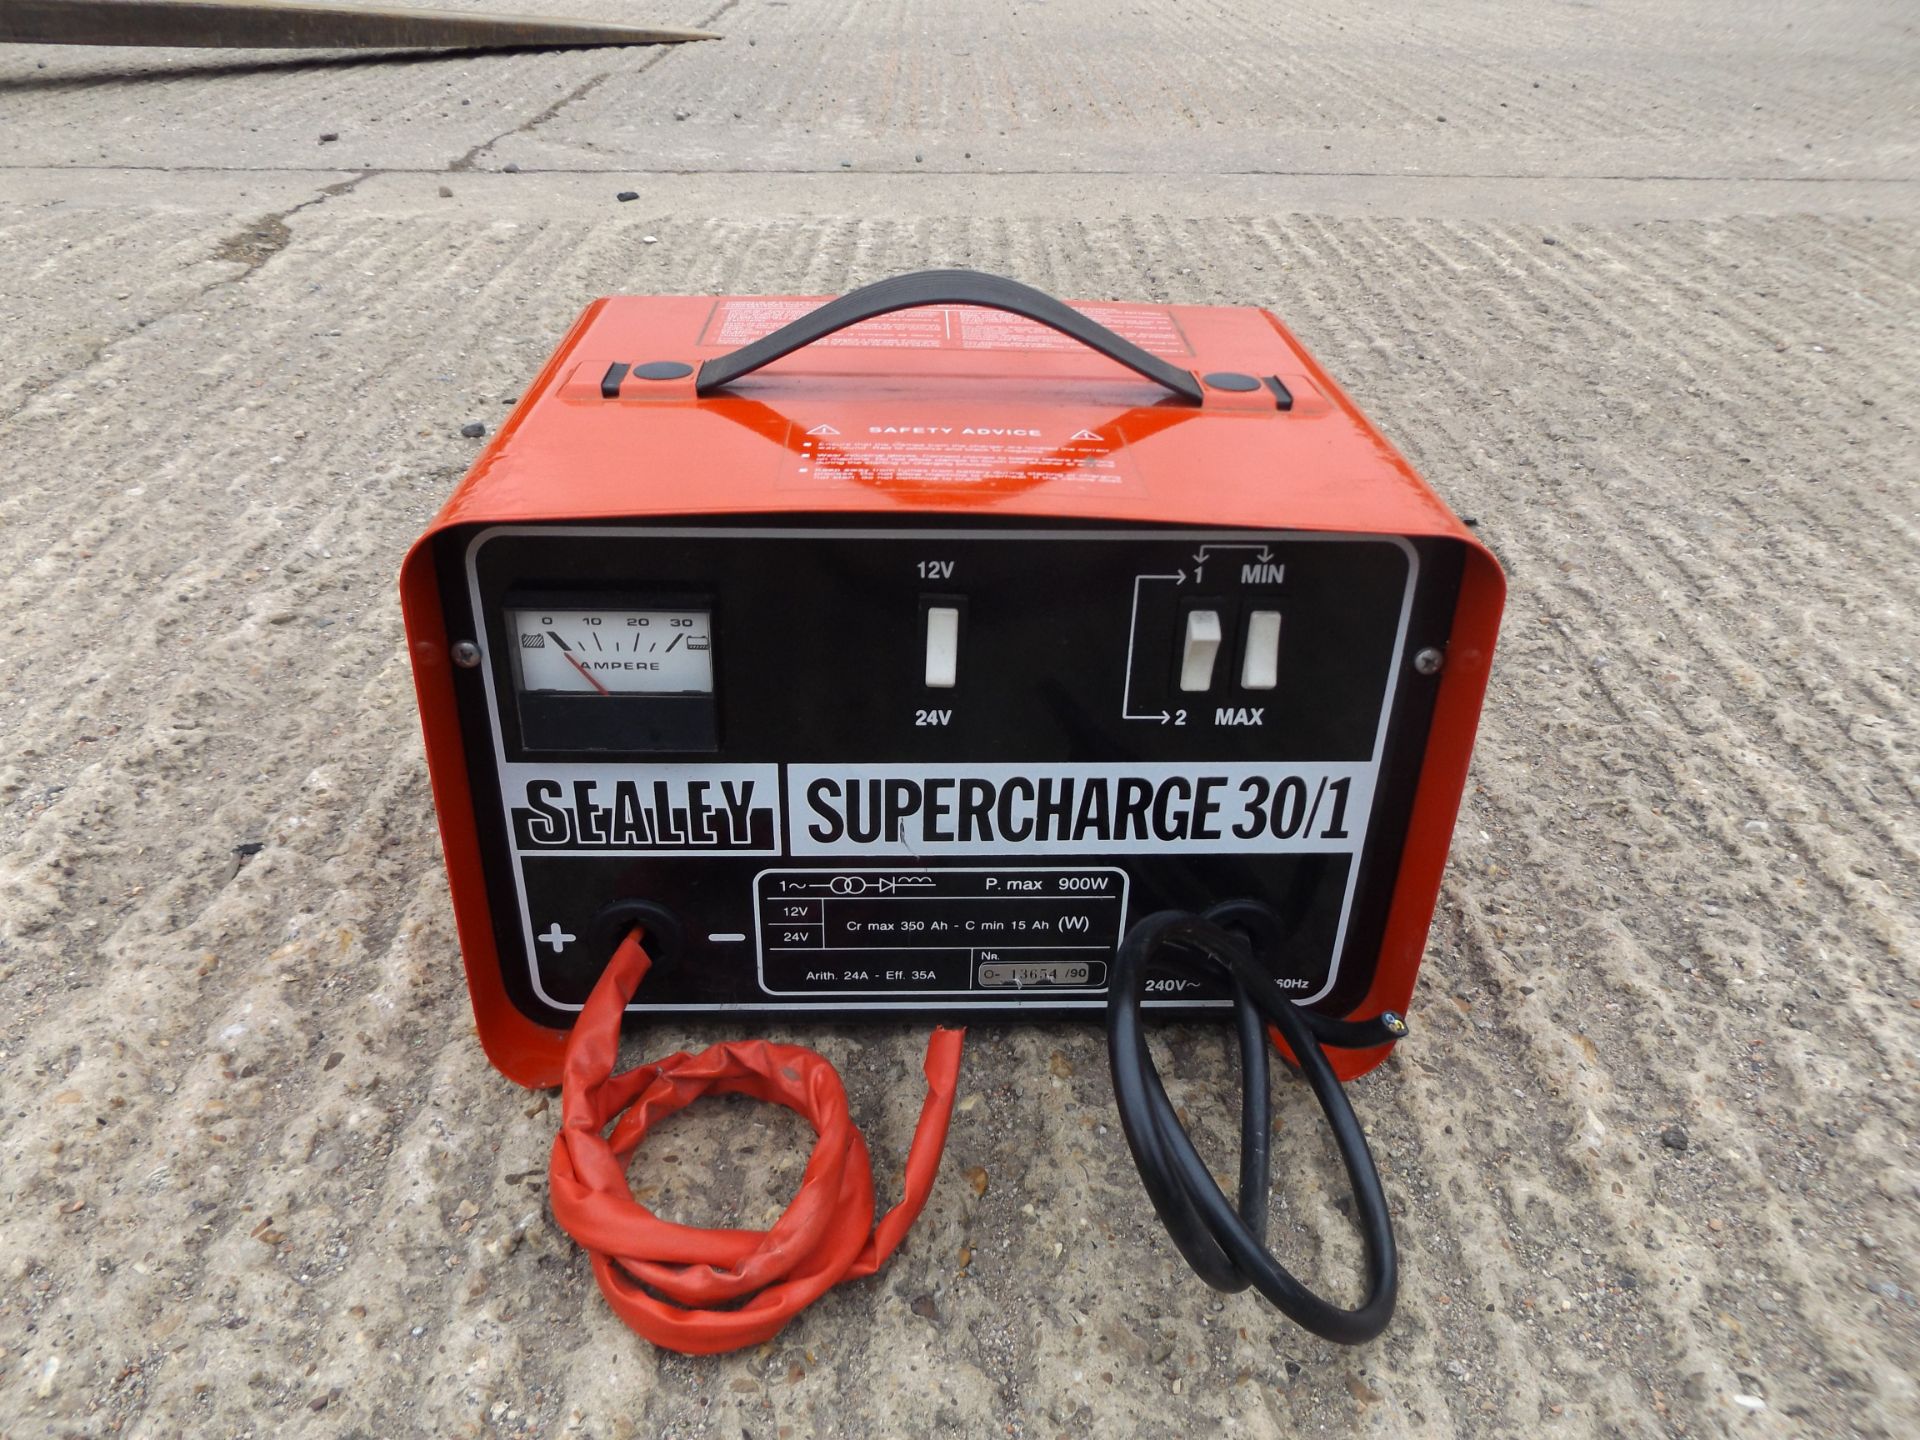 Sealey Supercharge 30/1 Battery Charger